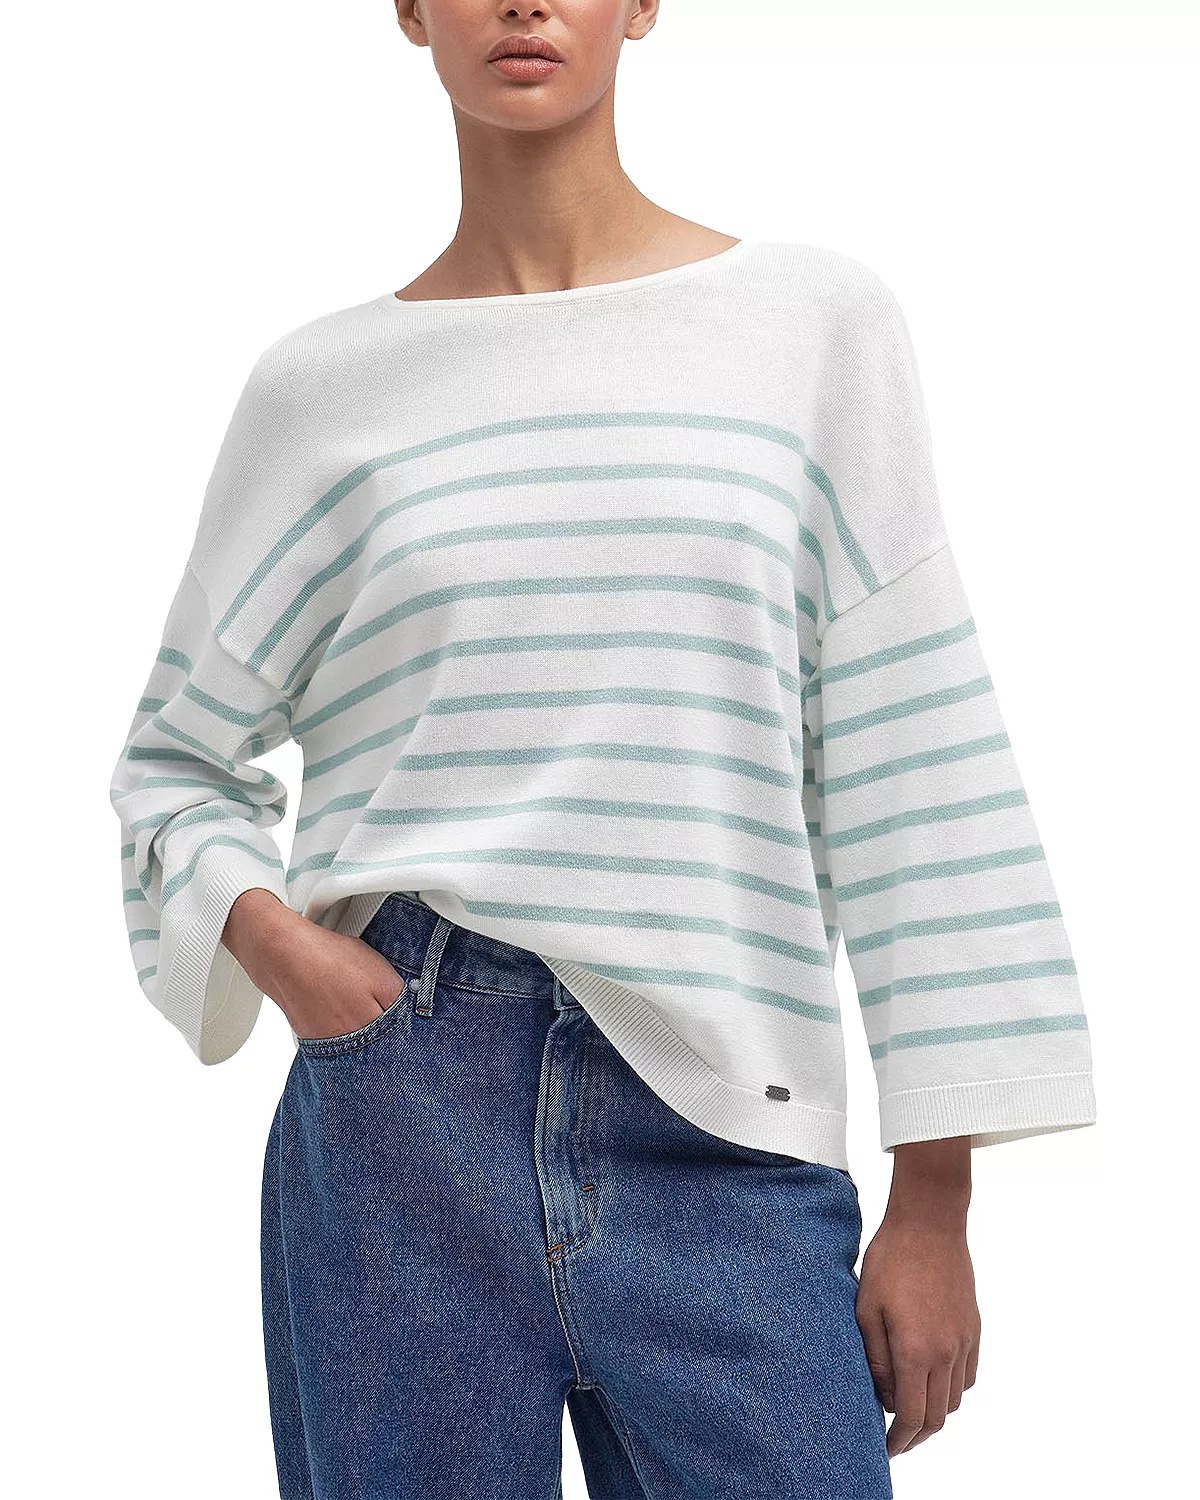 Kayleigh Striped Knit Sweater - 1